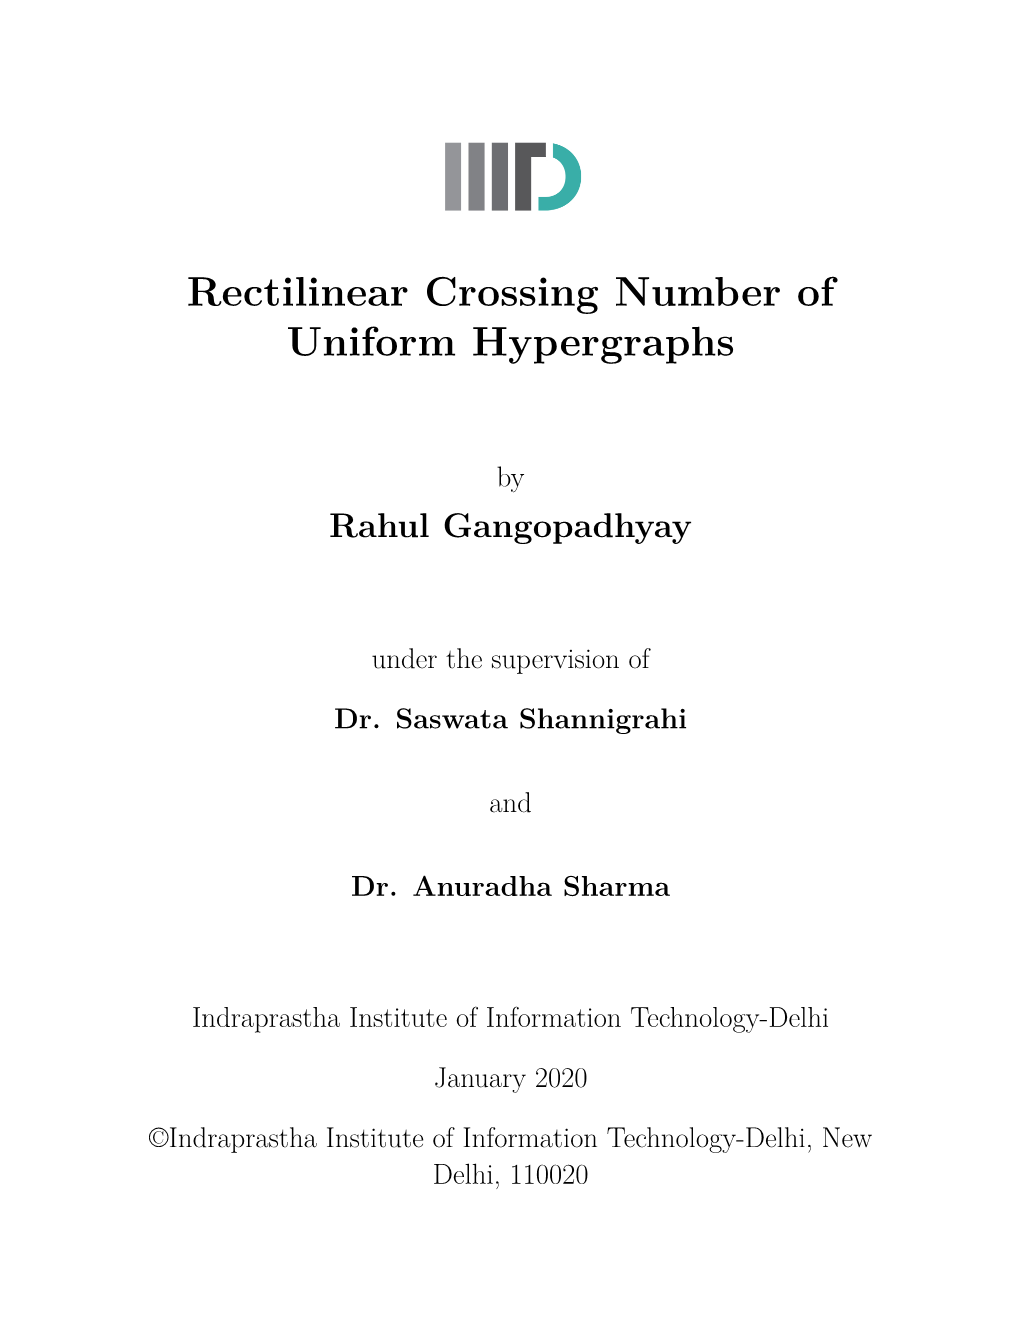 Rectilinear Crossing Number of Uniform Hypergraphs